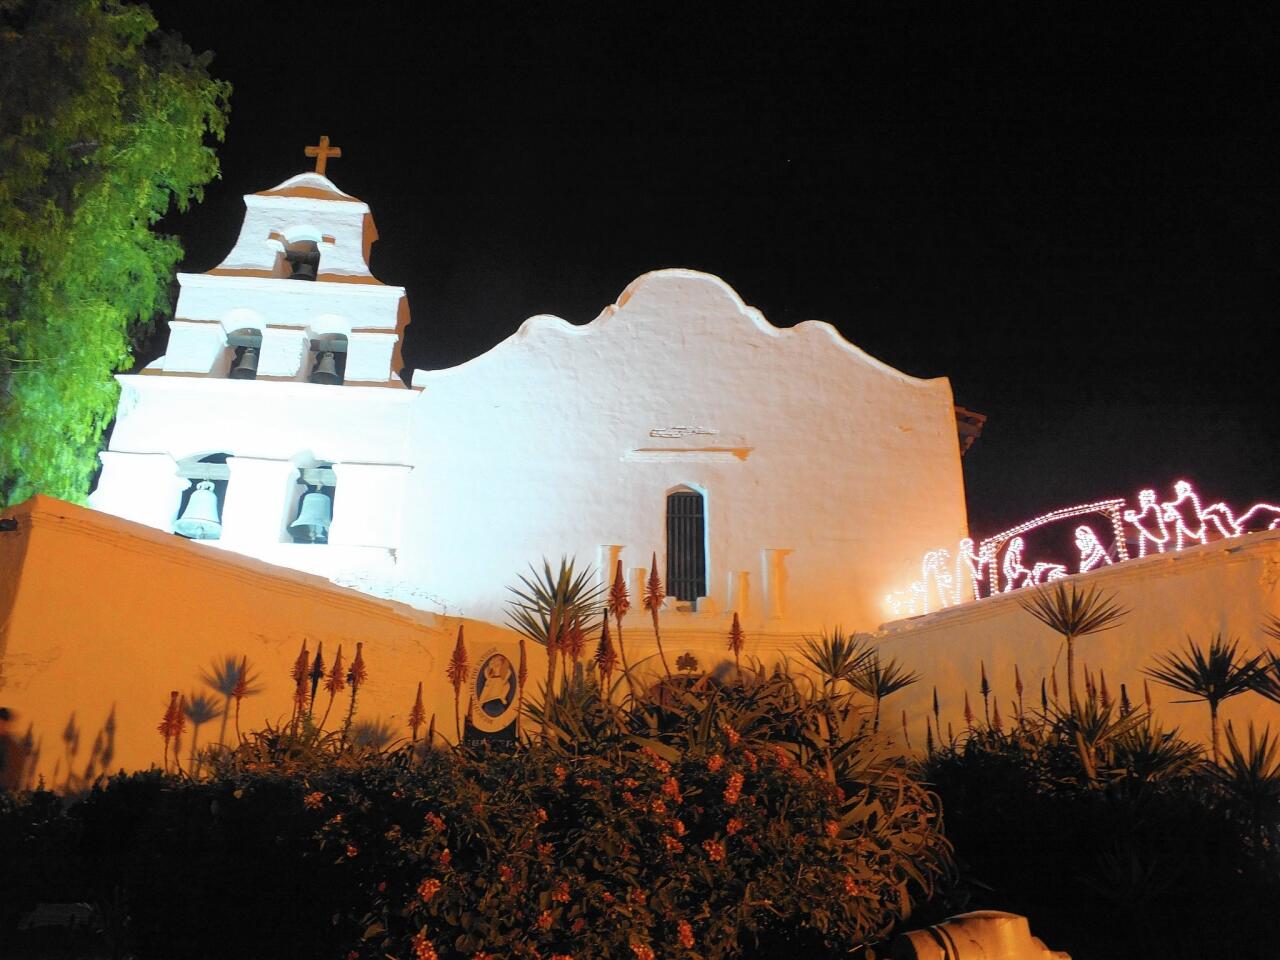 In the 19th century, San Diego de Alcala was moved from its original location to its present site, where water was more readily available.